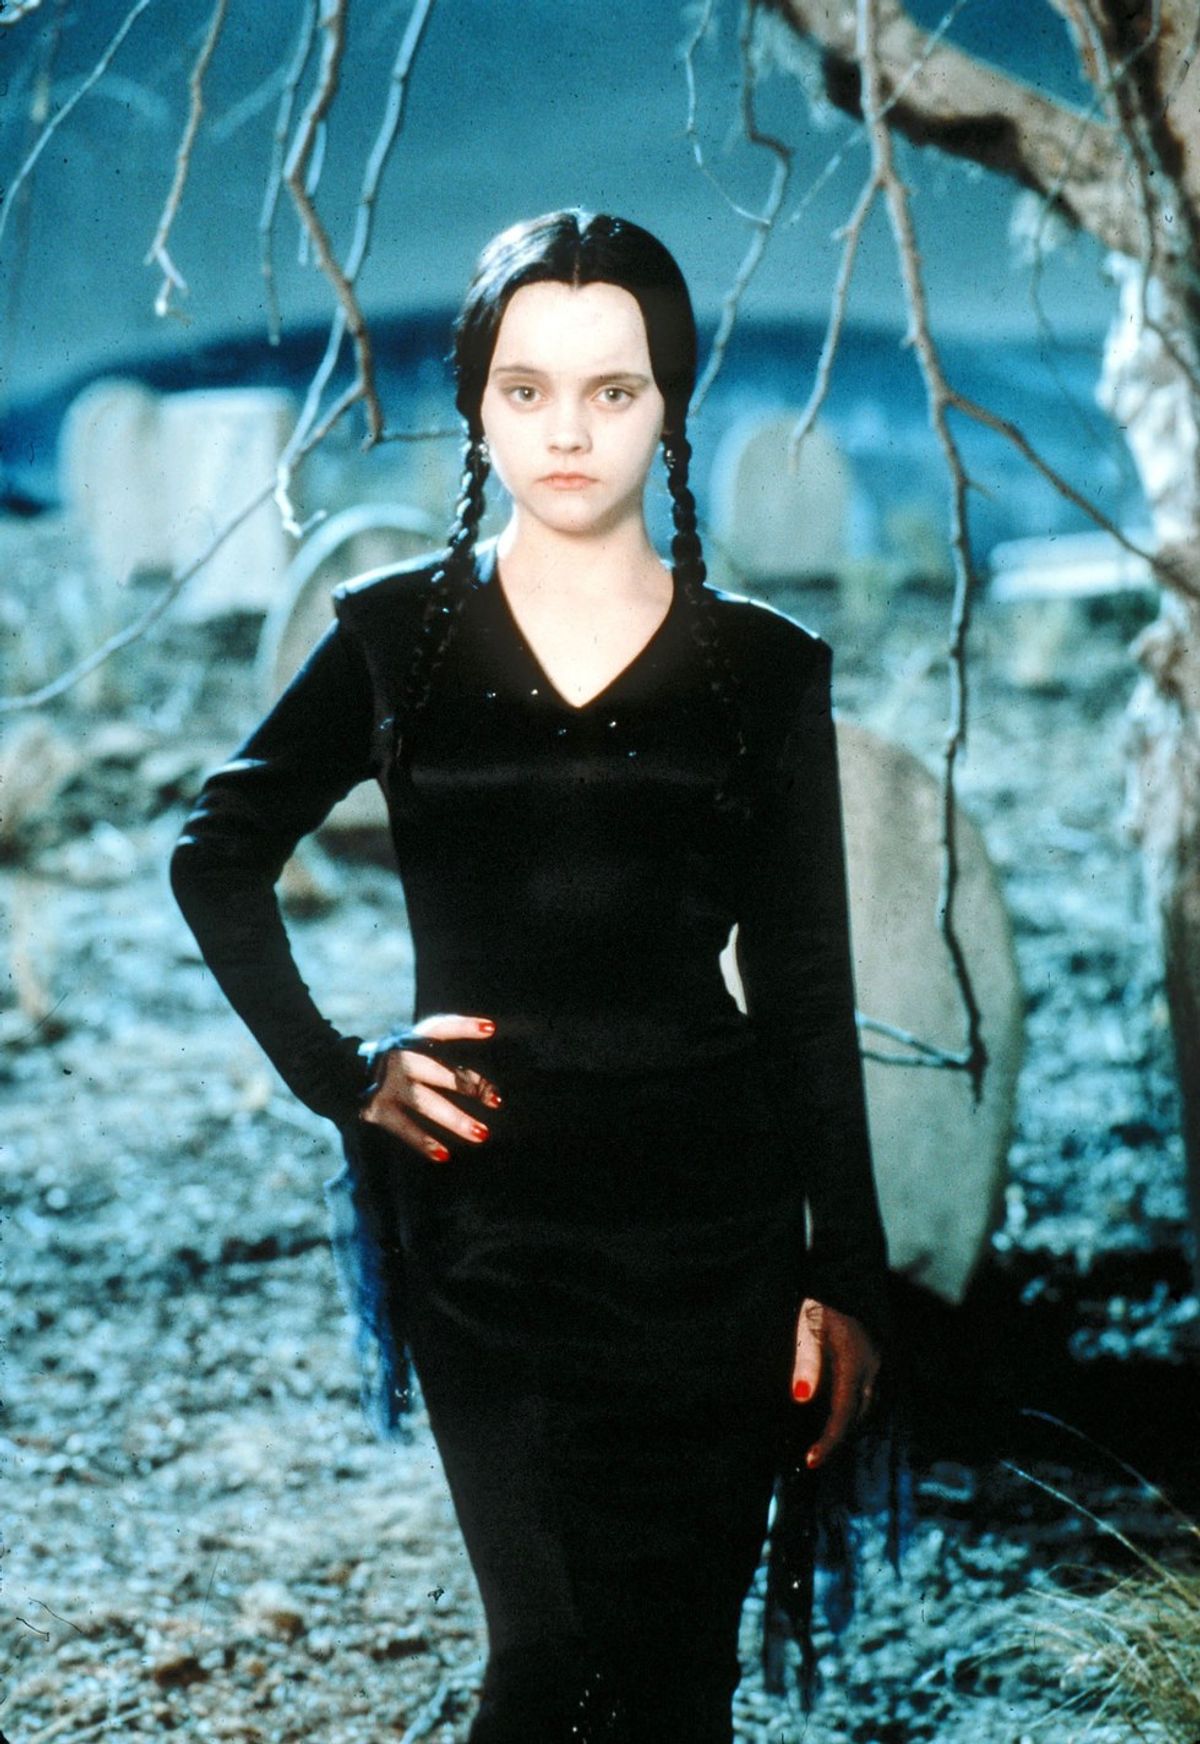 5 Things Only Wednesday Addams Will Tell You About Clothes